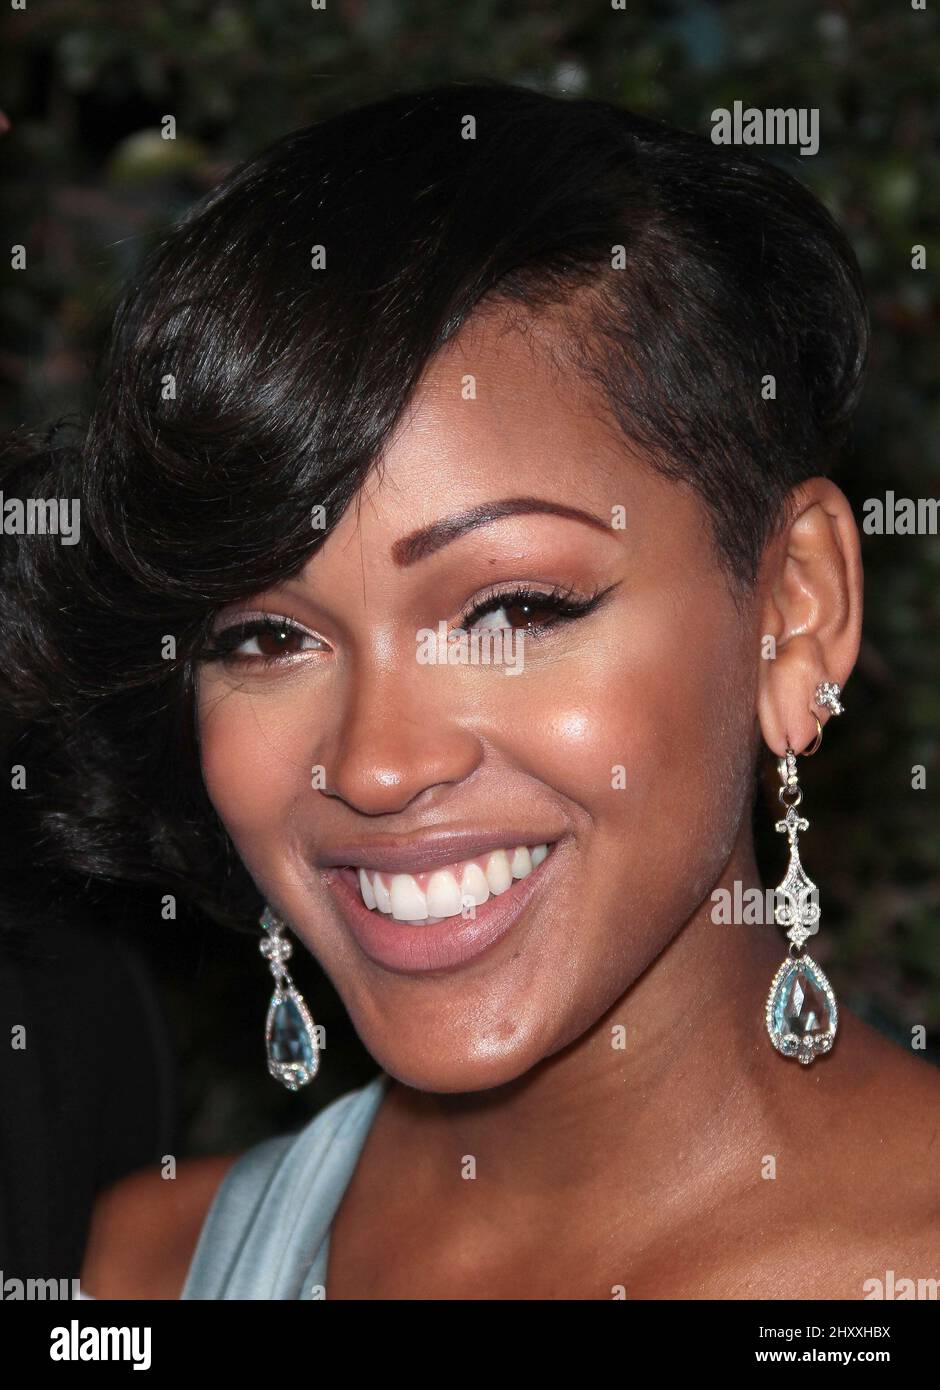 Meagan Good during Vanity Fair And Juicy Couture's 'Vanities' 20th Anniversary Party Supporting All It Takes held at Siren Studios, Hollywood, California Stock Photo